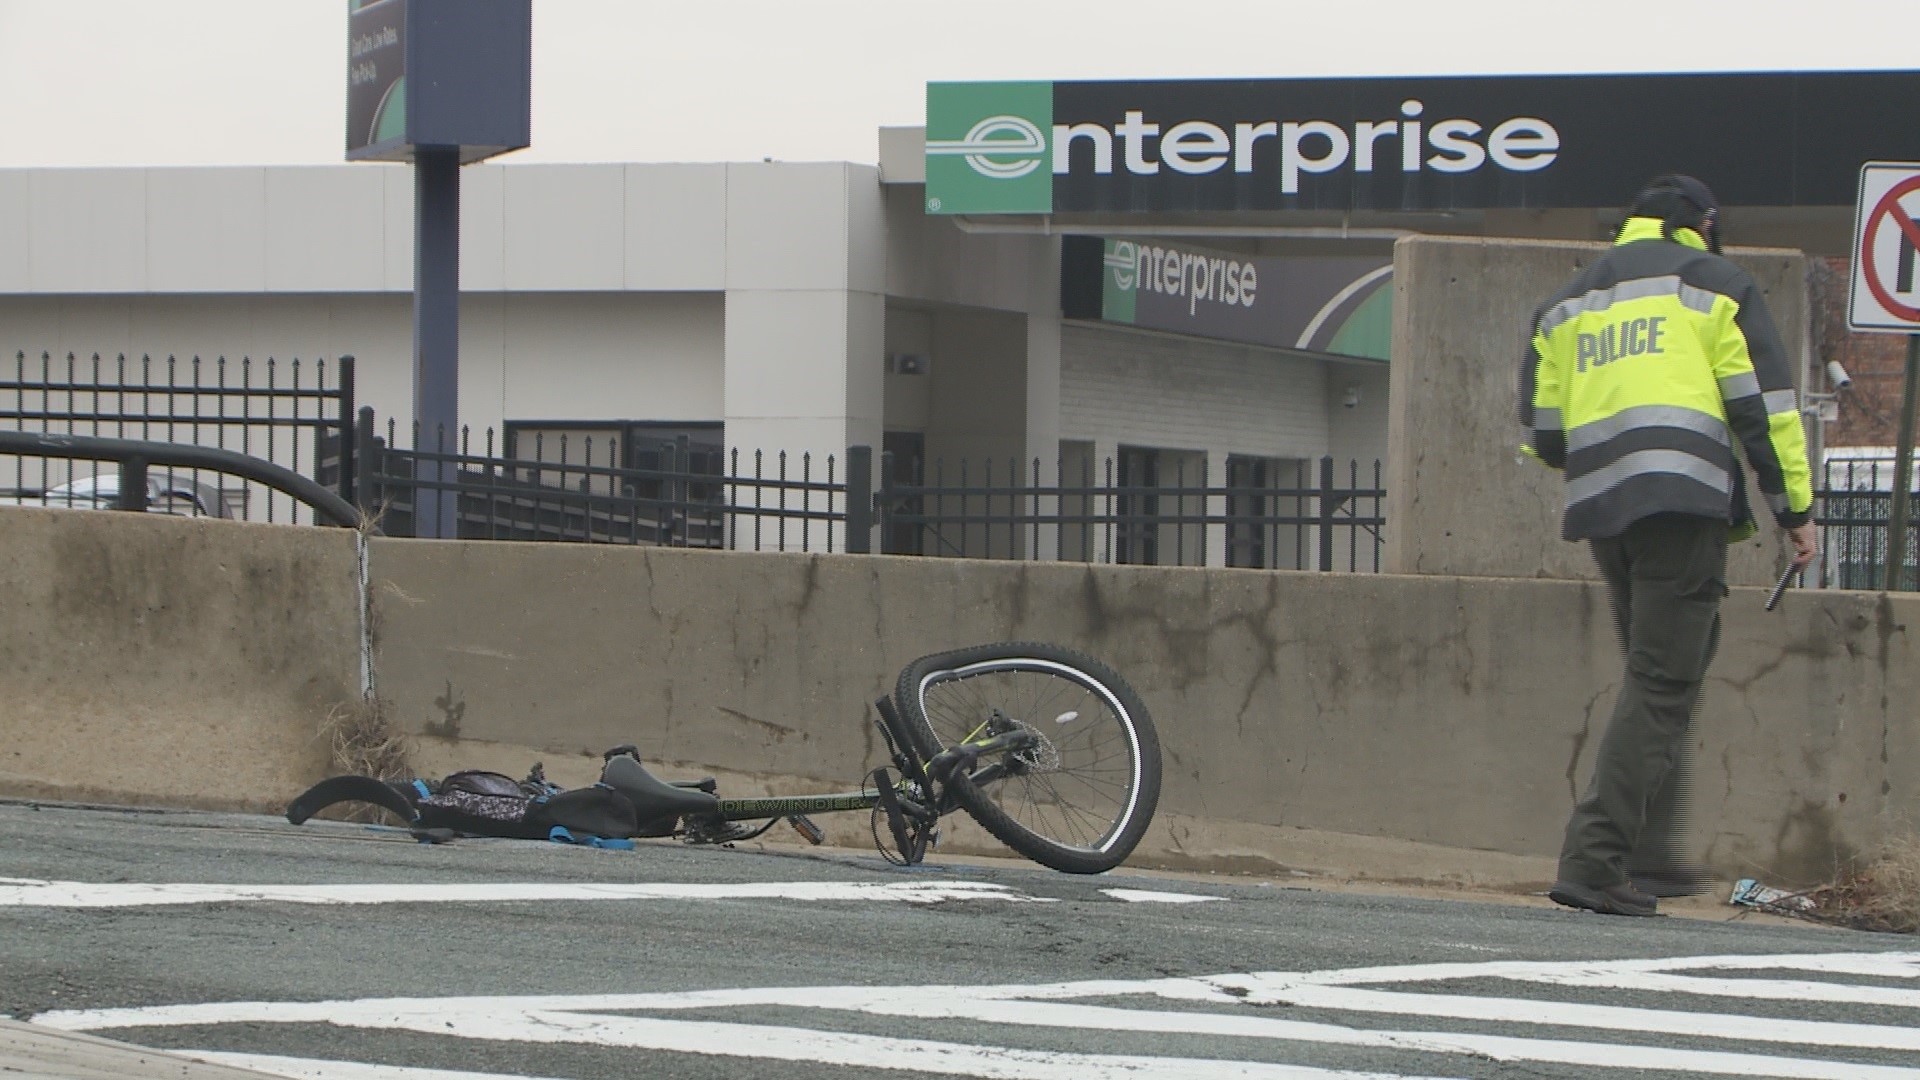 The cyclist was one of two people injured in pedestrian-involved car crashes on Monday within the District.